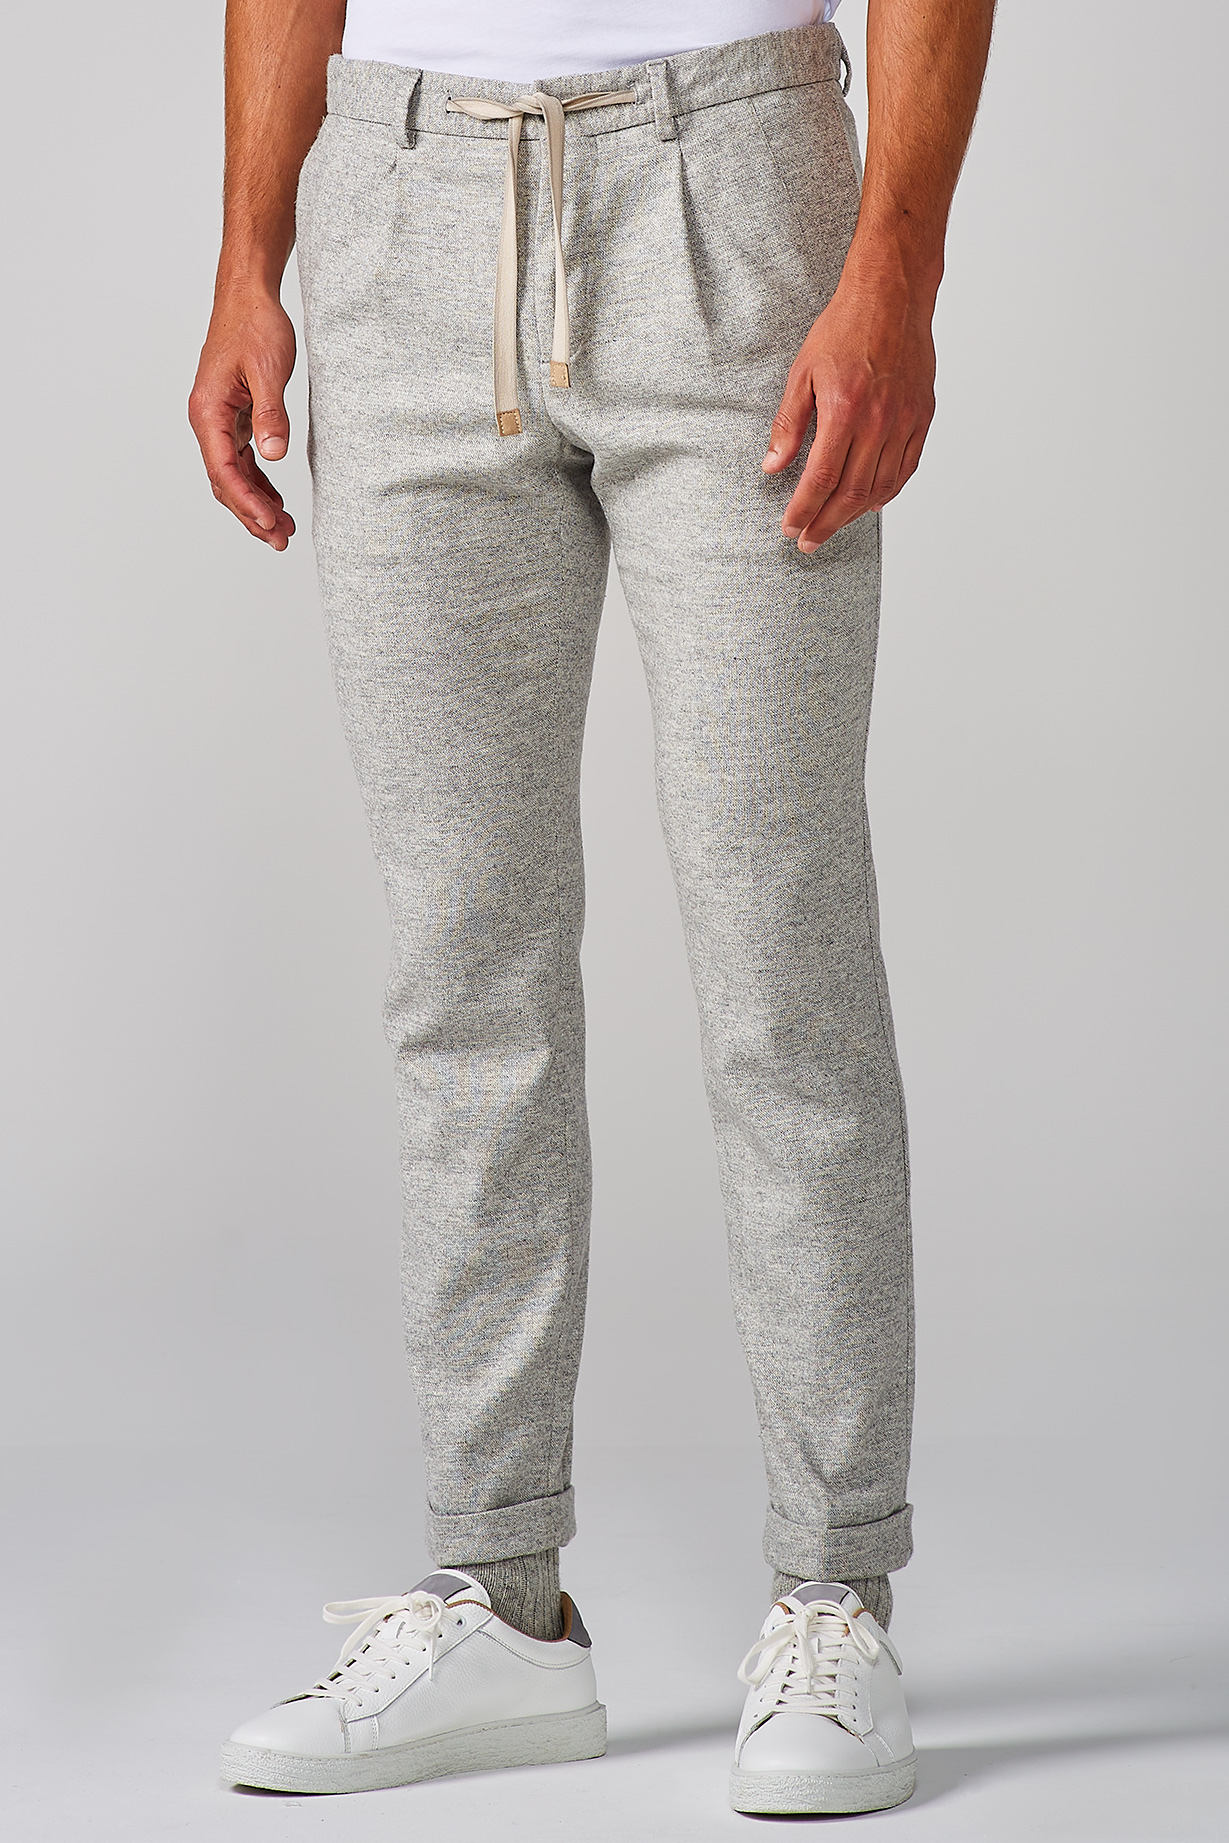 GREY WOOL BLEND LACE-UP TROUSER